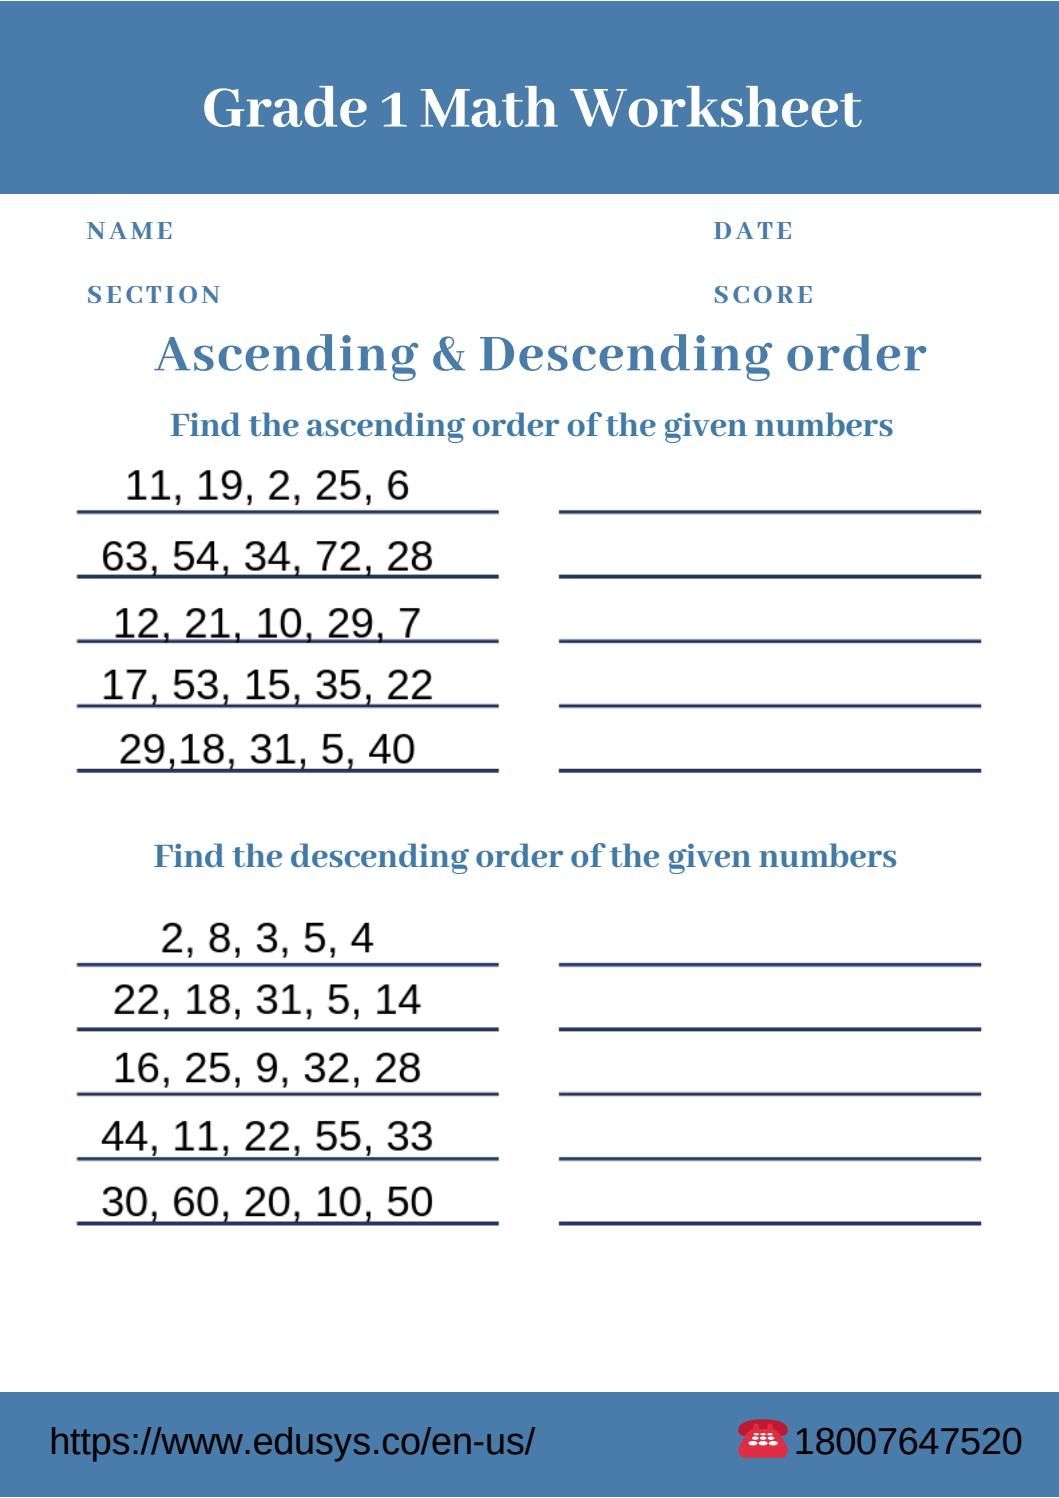 Counting Worksheet For Class 1 And Ukg Math Elearnbuzz Ordering Number Ascending Worksheet 1140